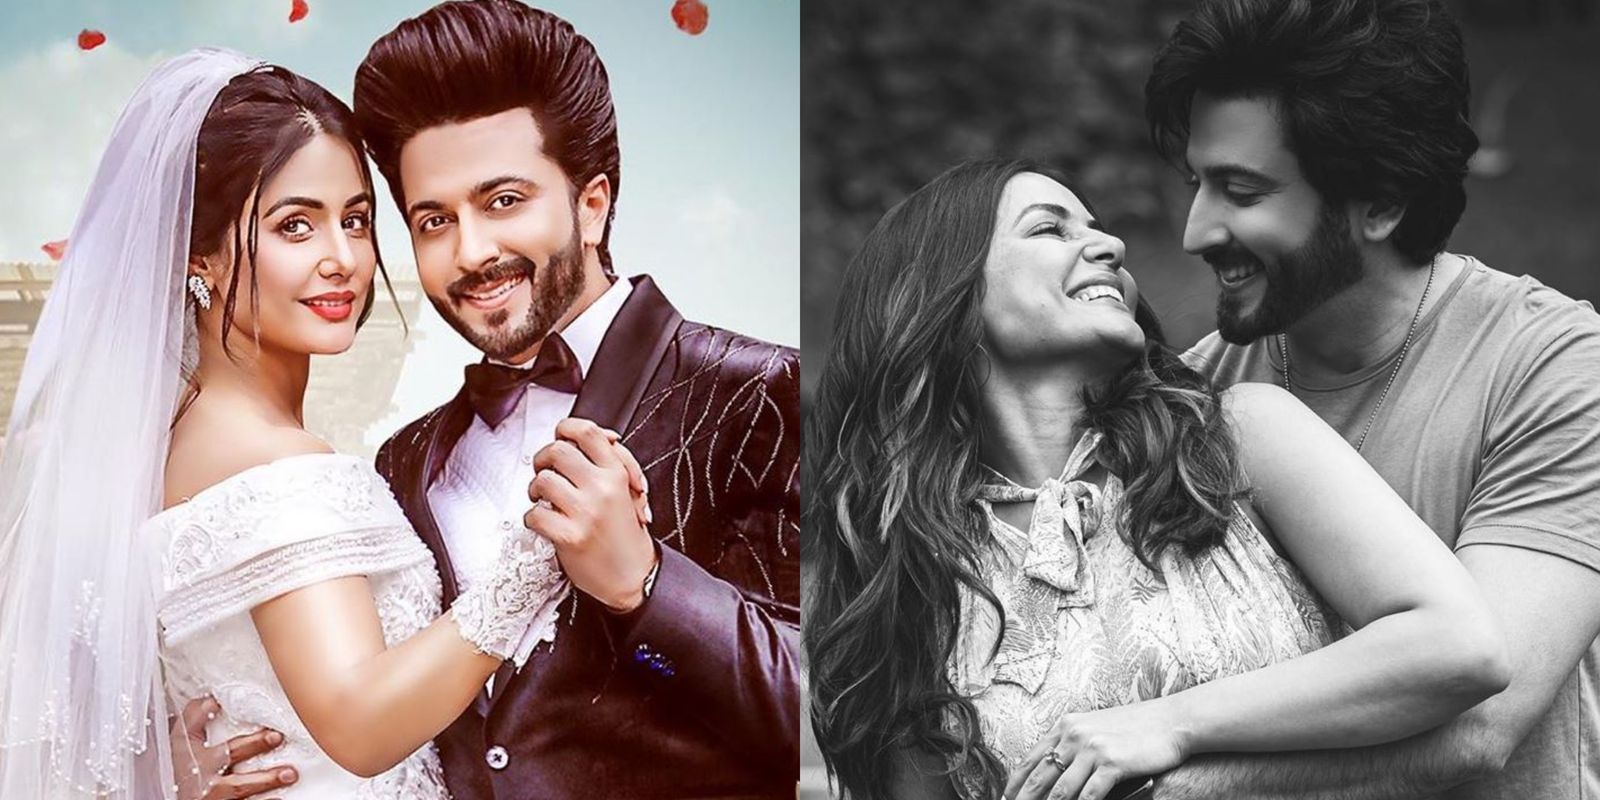 Hina Khan Reveals She Changed 10-12 Outfits In Humko Tum Mil Gaye Co-Starring Naagin Actor Dheeraj Dhoopar